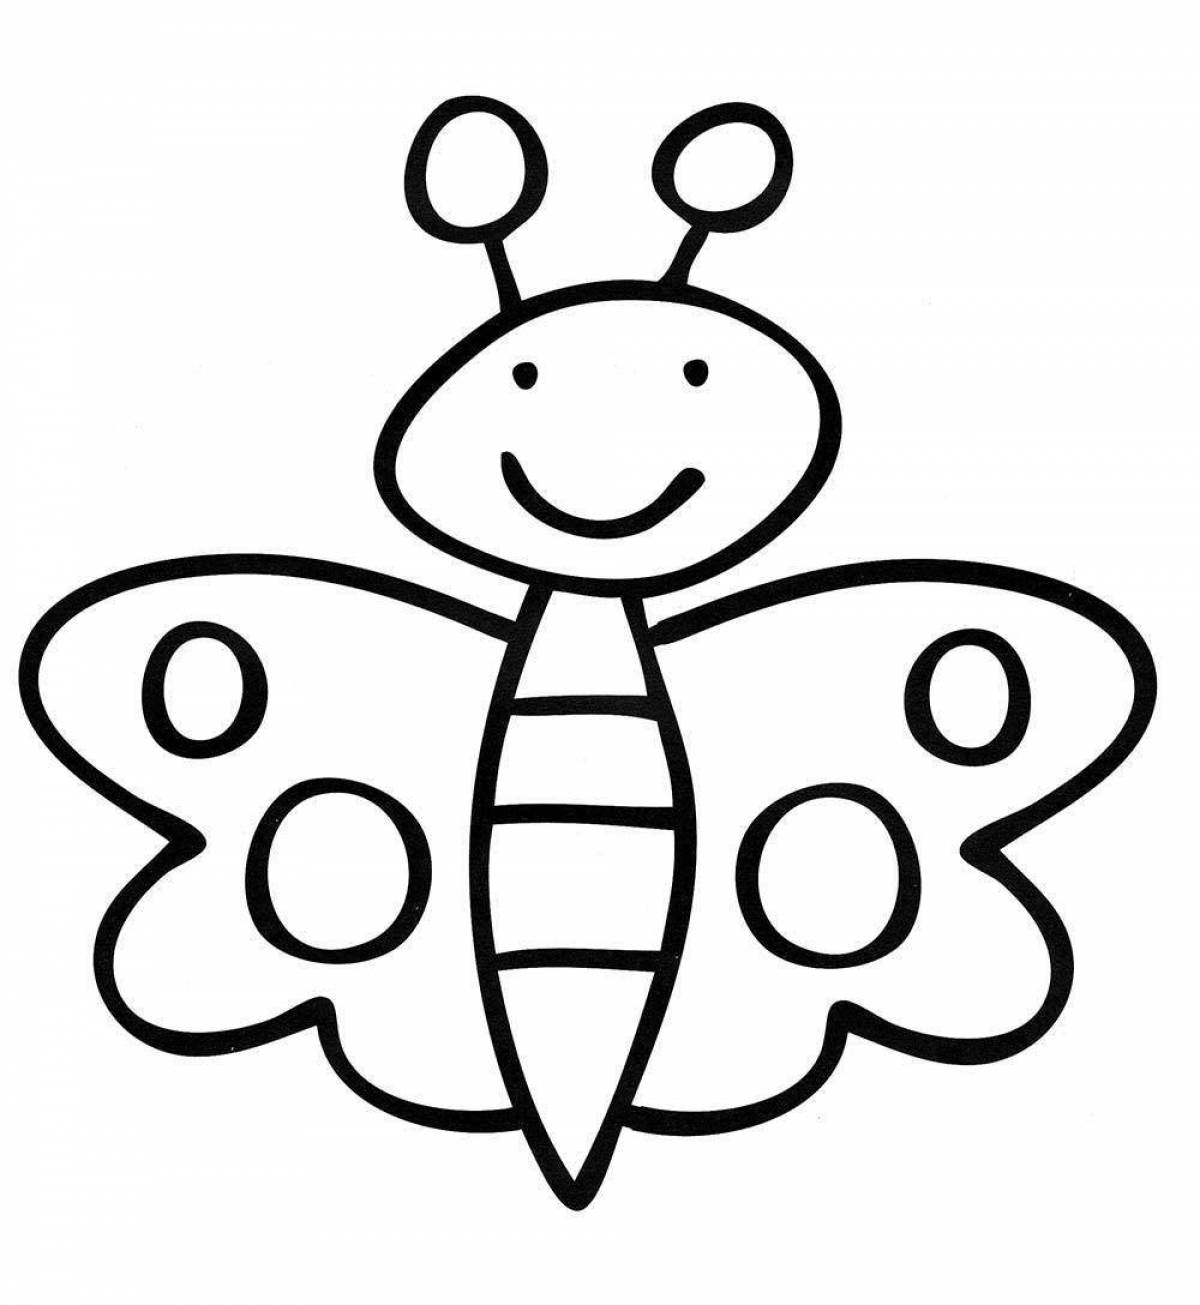 Adorable simple coloring book for kids